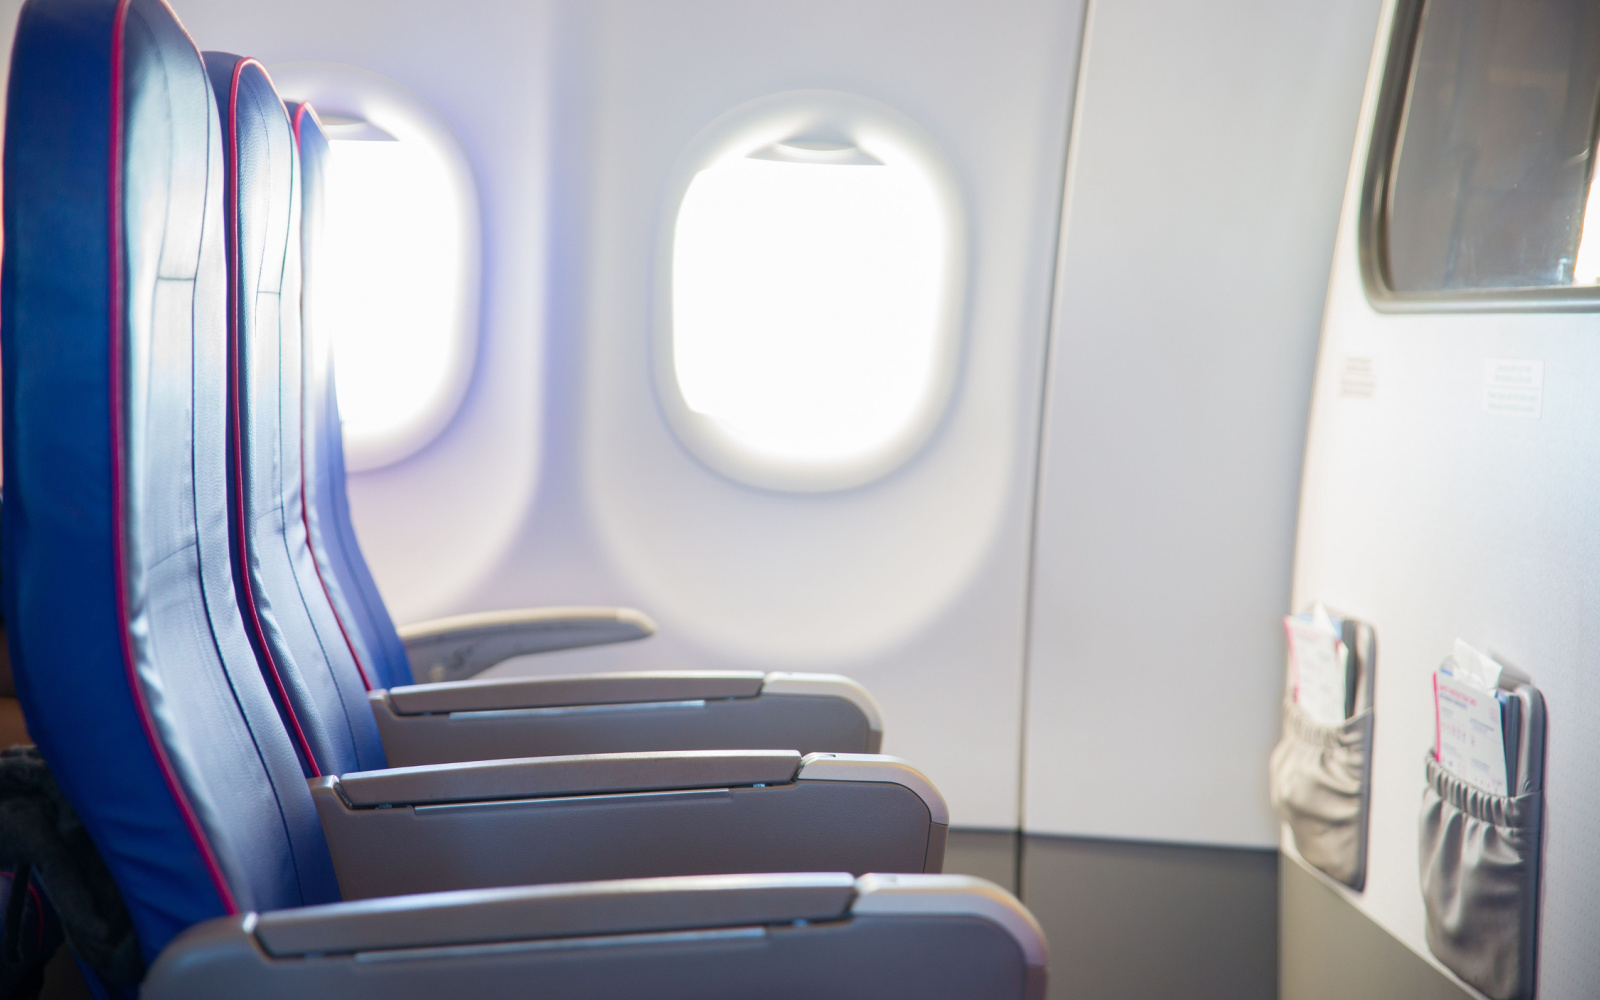 What Is a Bulkhead Seat on a Plane? | We’ll Explain